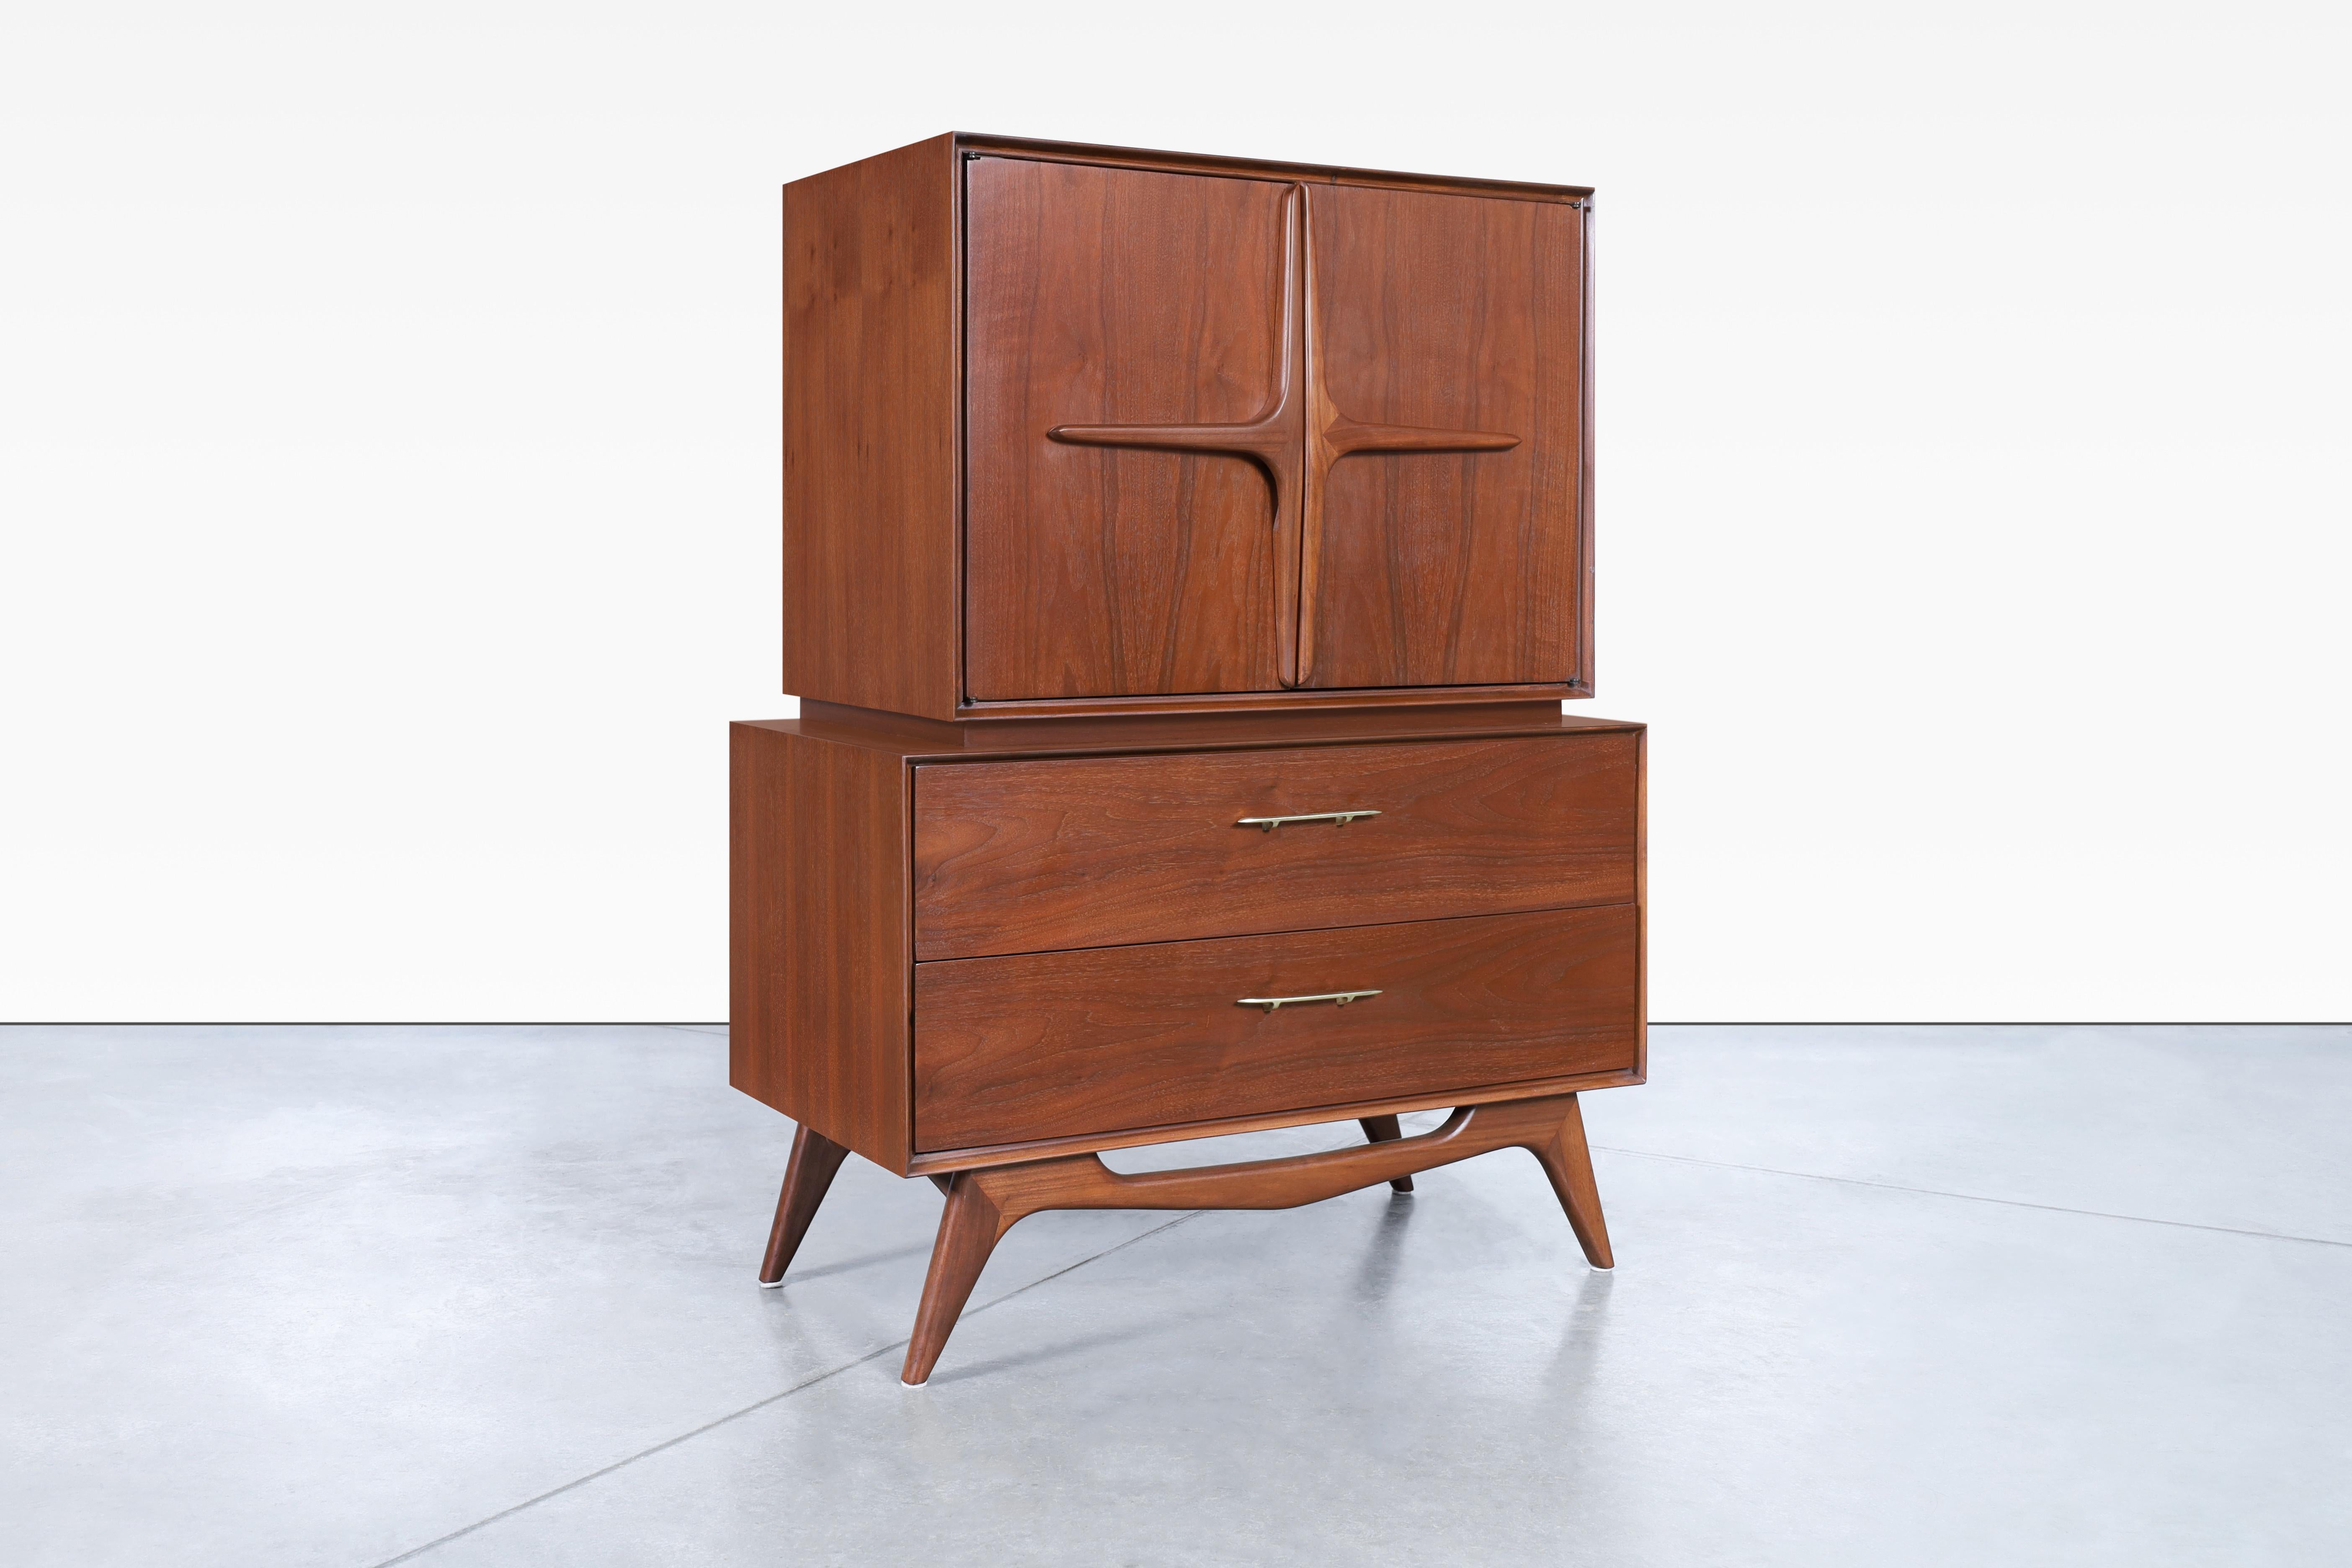 Vintage sculptural walnut high-boy manufactured in the United States. This exquisite highboy is crafted from premium quality walnut wood and boasts a daring design that will definitely make a statement in any room. The brass handles, along with the